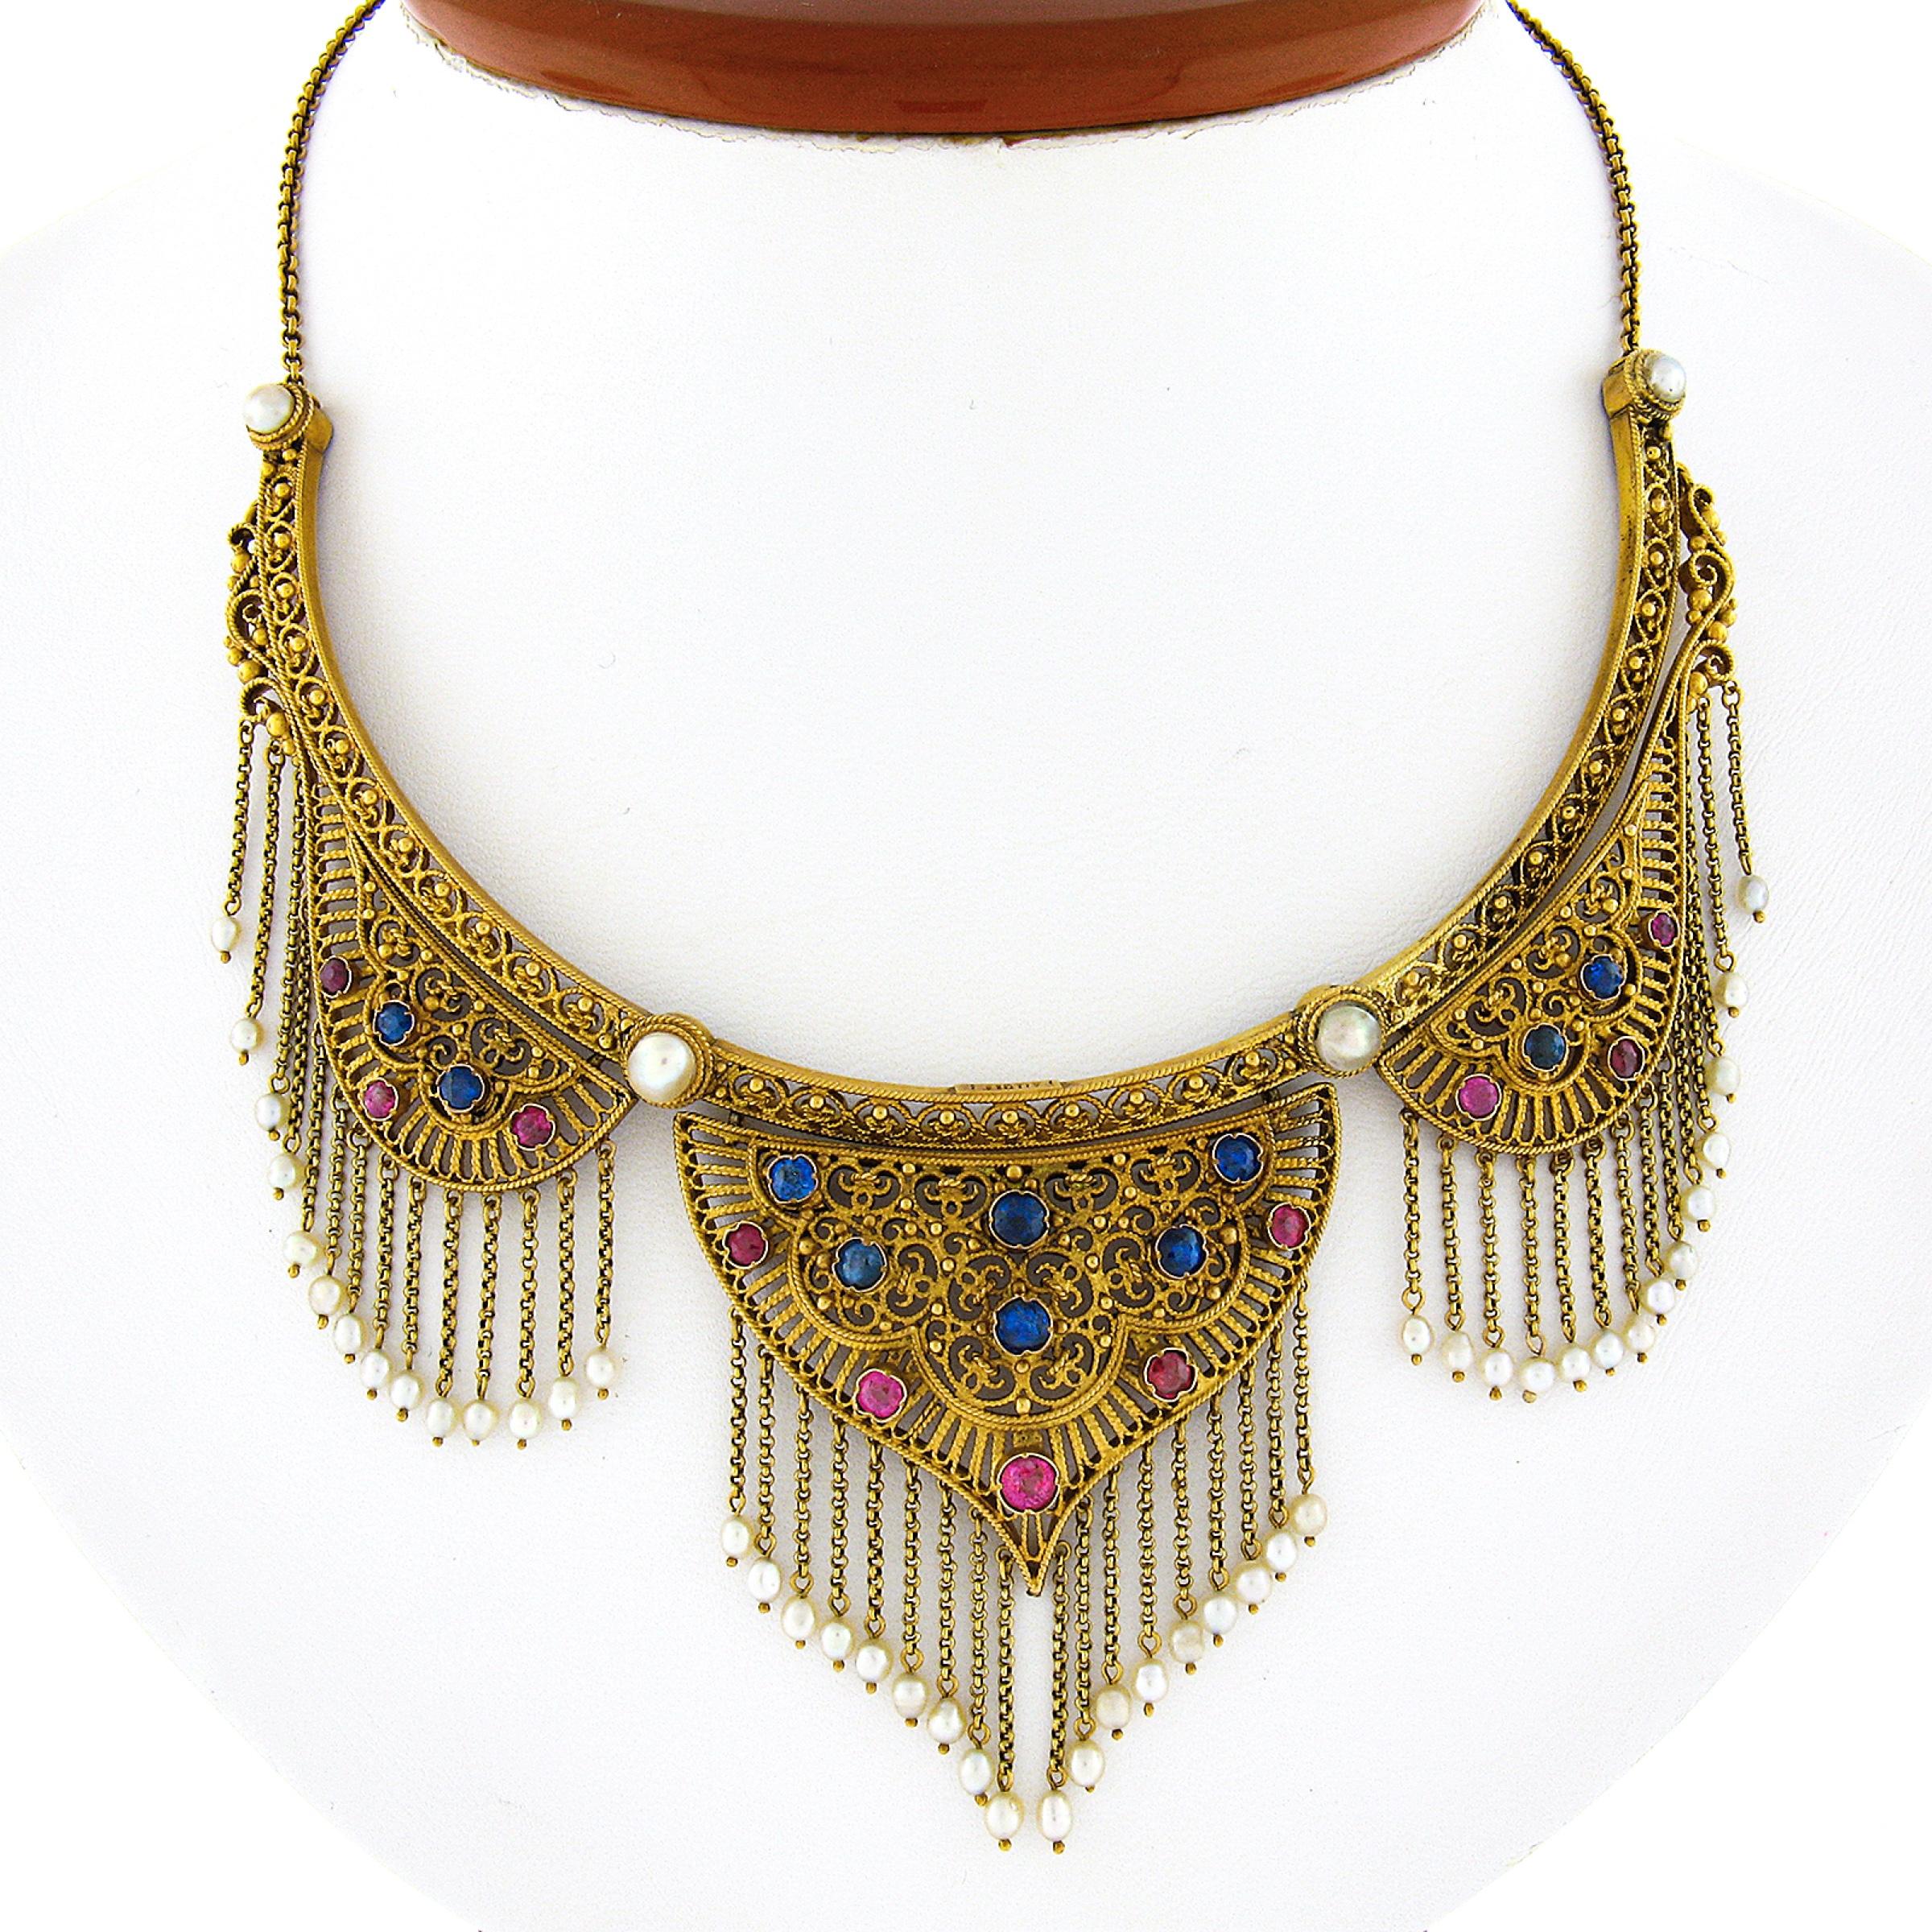 You are looking at an absolutely magnificent antique collier statement necklace designed by Luigi Pallotti that was crafted in solid 18k yellow gold during the late Victorian era. This necklace displays a truly outstanding Neo renaissance style